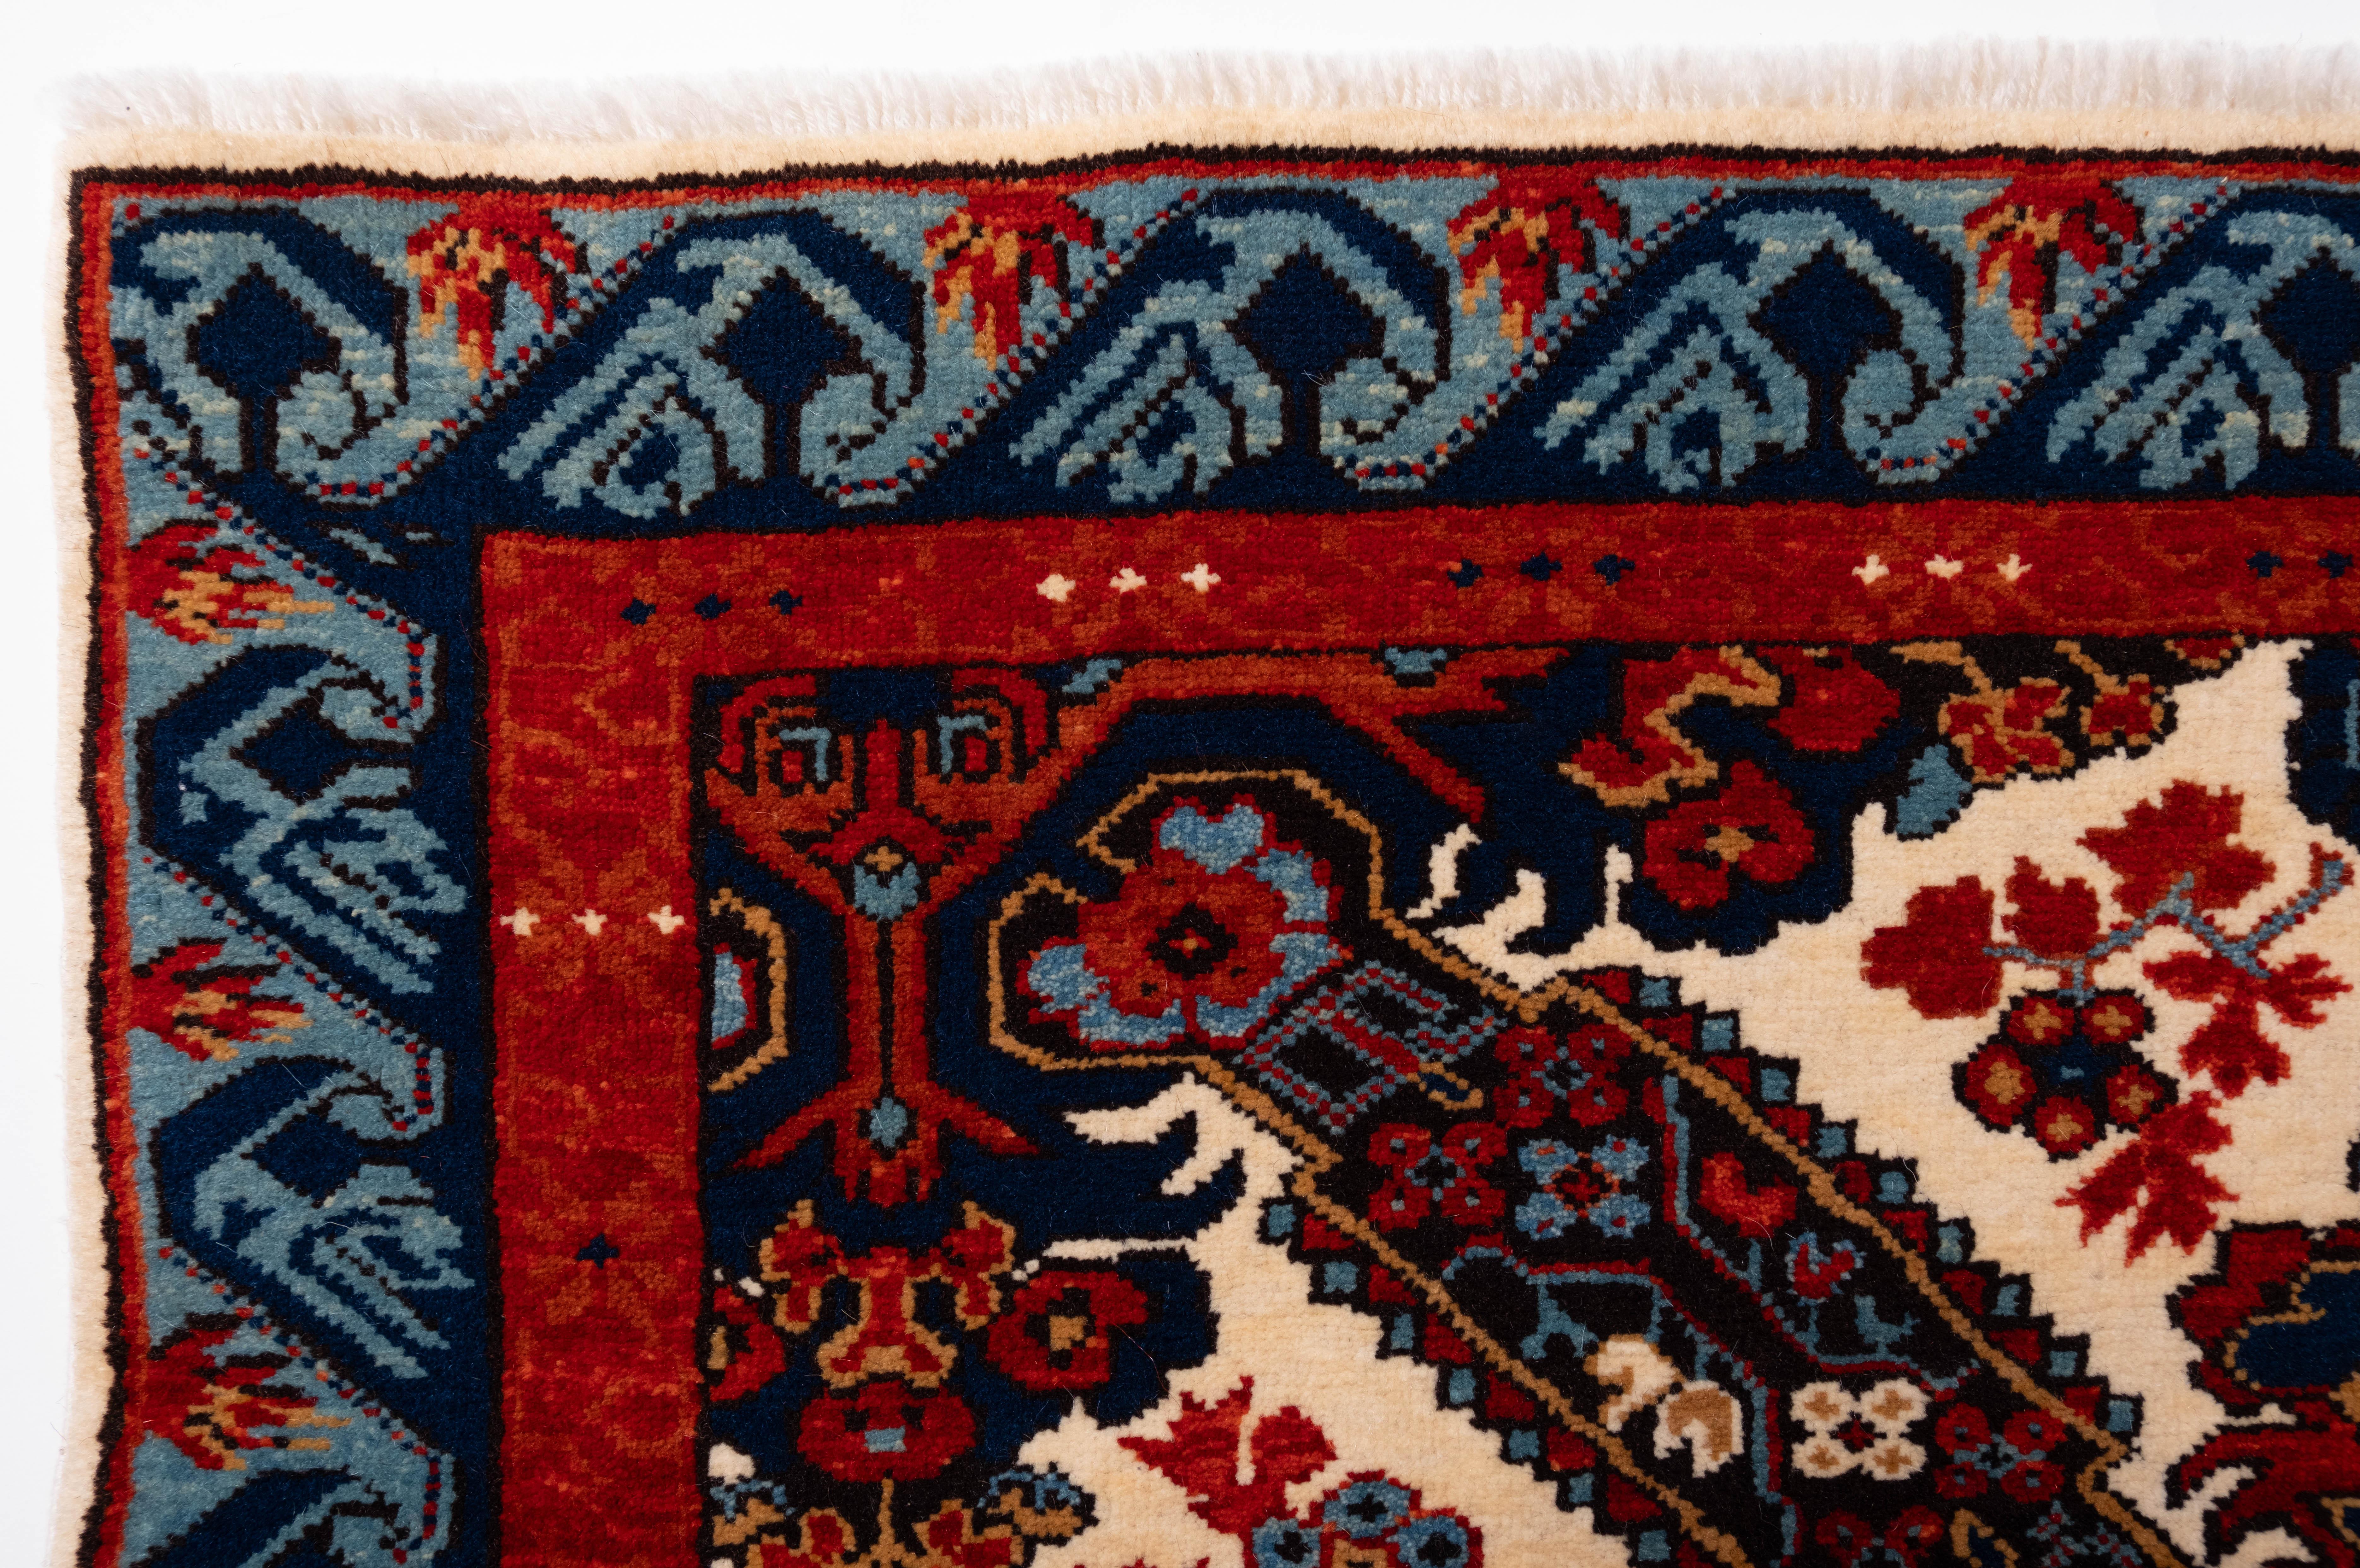 The source of the rug comes from the book Tapis du Caucase - Rugs of the Caucasus, Ian Bennett & Aziz Bassoul, The Nicholas Sursock Museum, Beirut, Lebanon 2003, nr.90 and Oriental Rugs Volume 1 Caucasian, Ian Bennett, Oriental Textile Press,